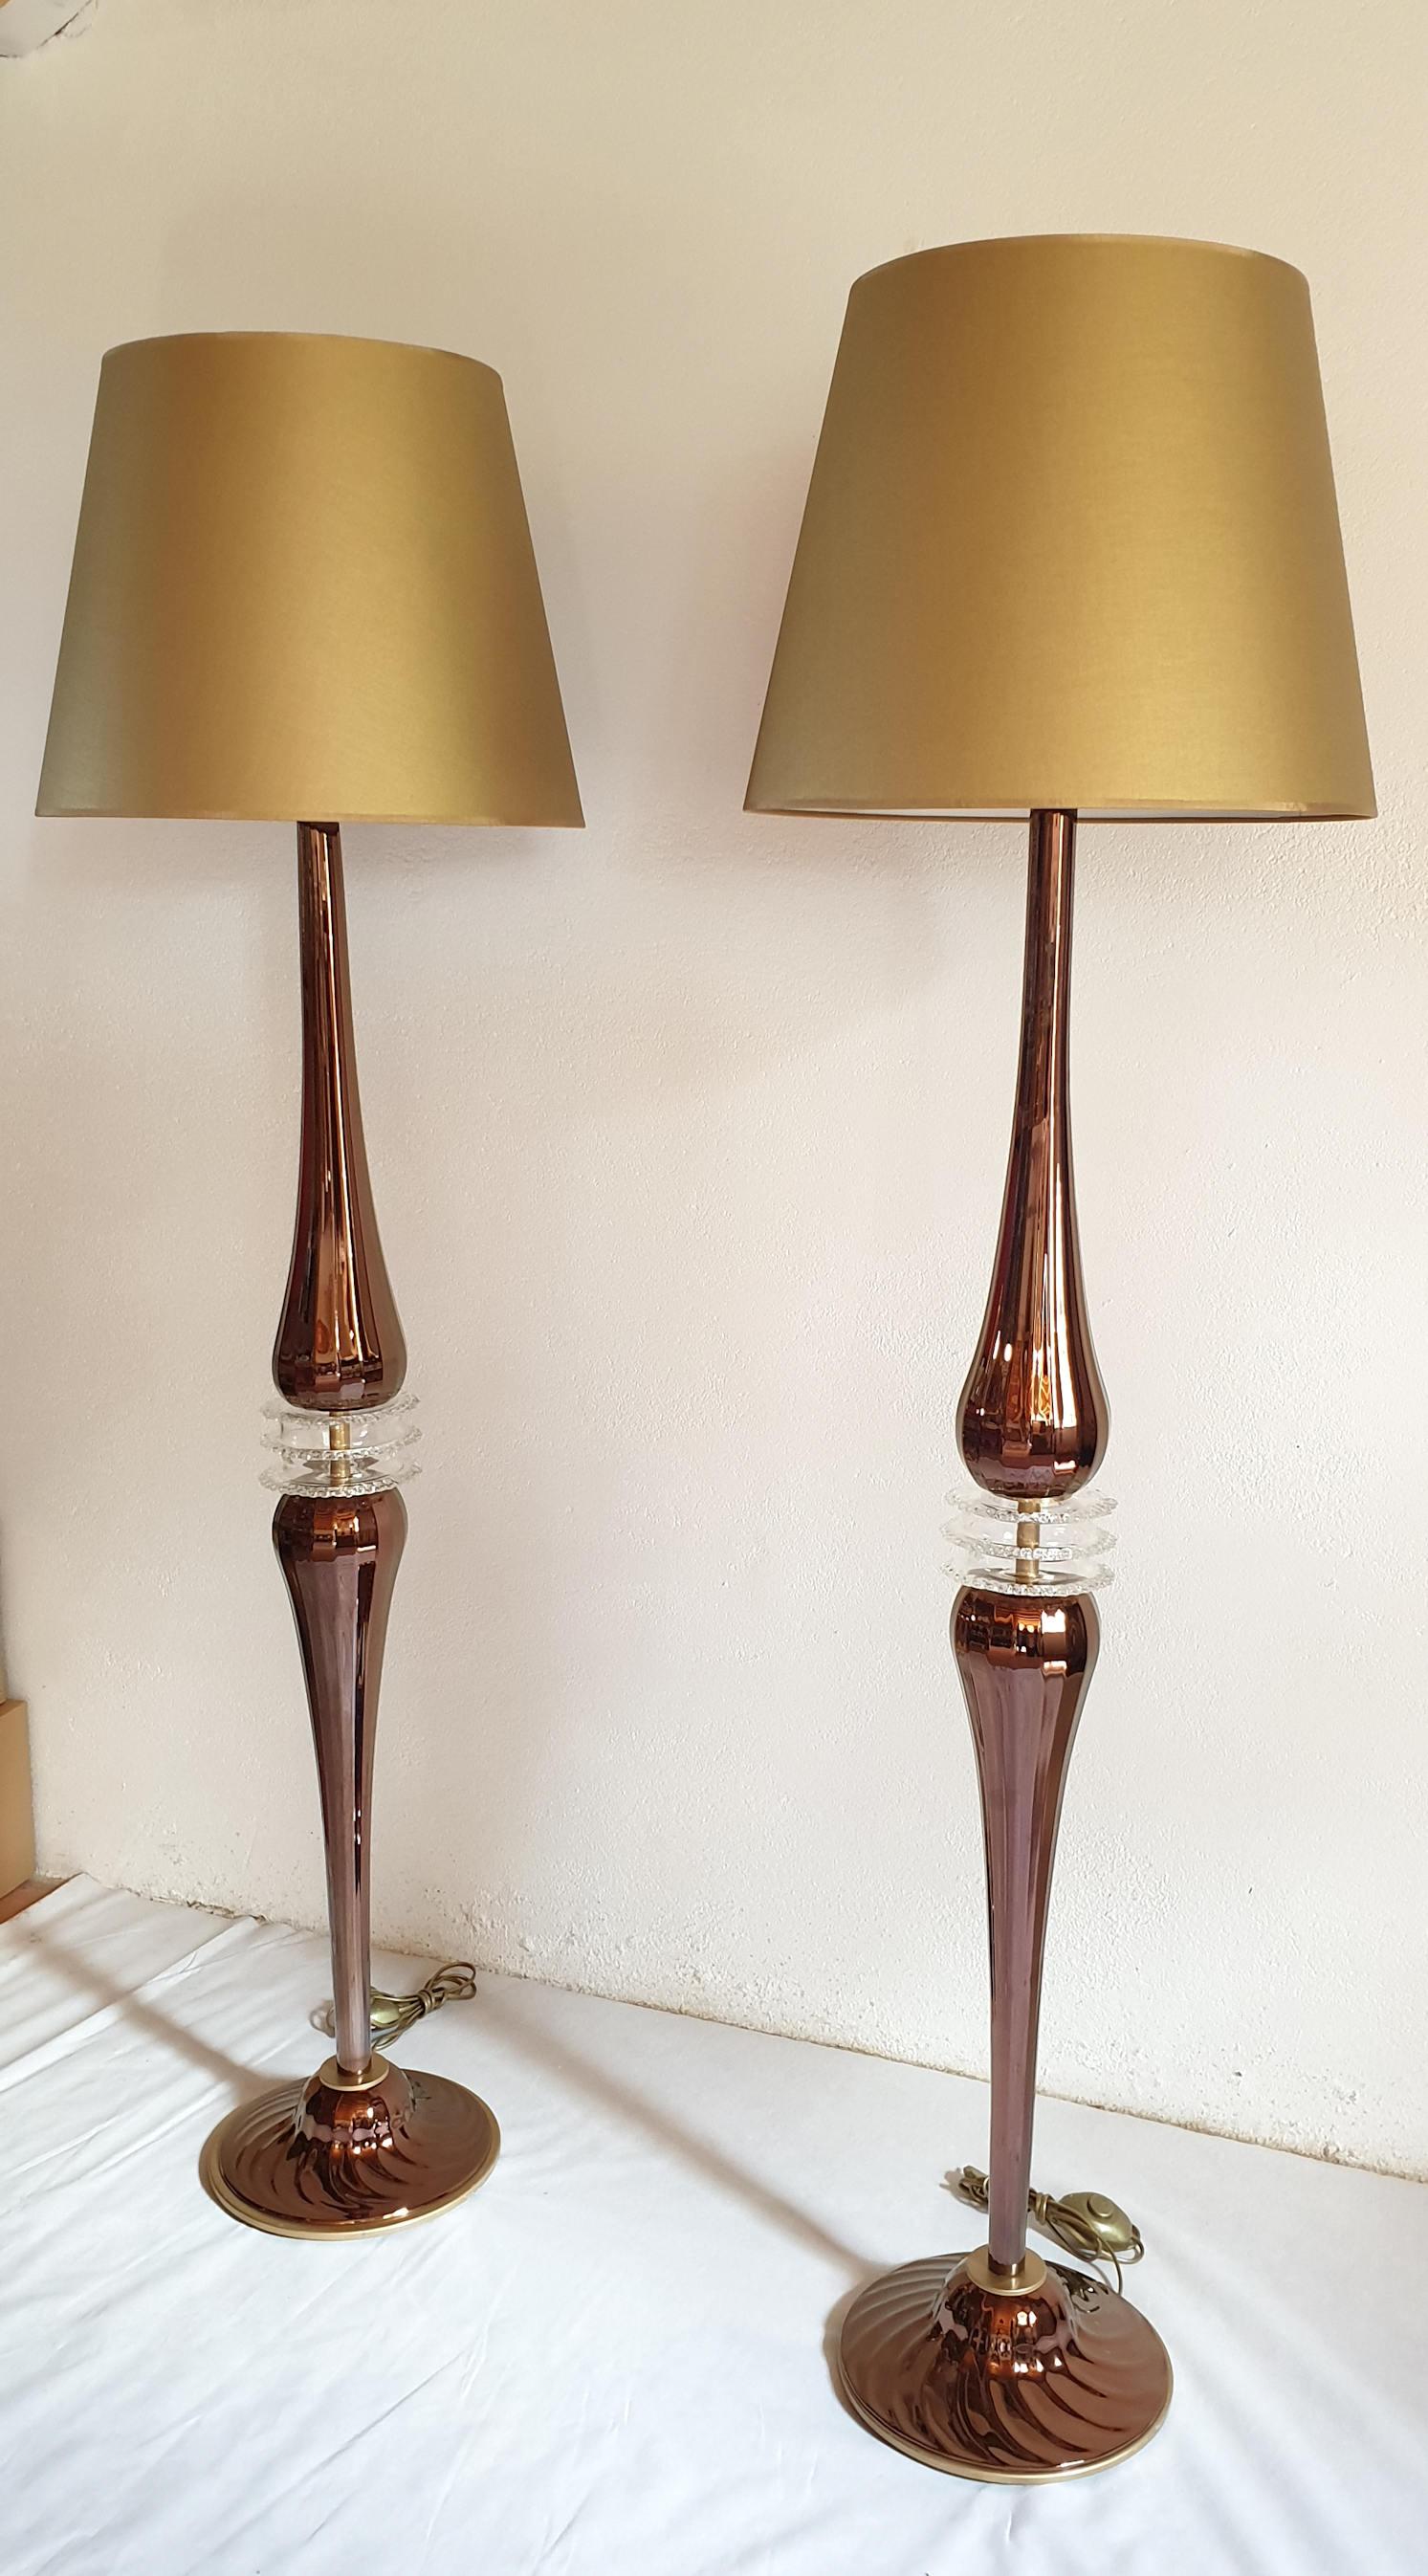 Large pair of Mid-Century Modern hand blown Murano glass floor lamps, with beige and gold fabric new shades.
In the style of Cenedese, Italy.
The glass is in copper mirrored color, with regular lines, and clear glass centre sfere.
They are hand